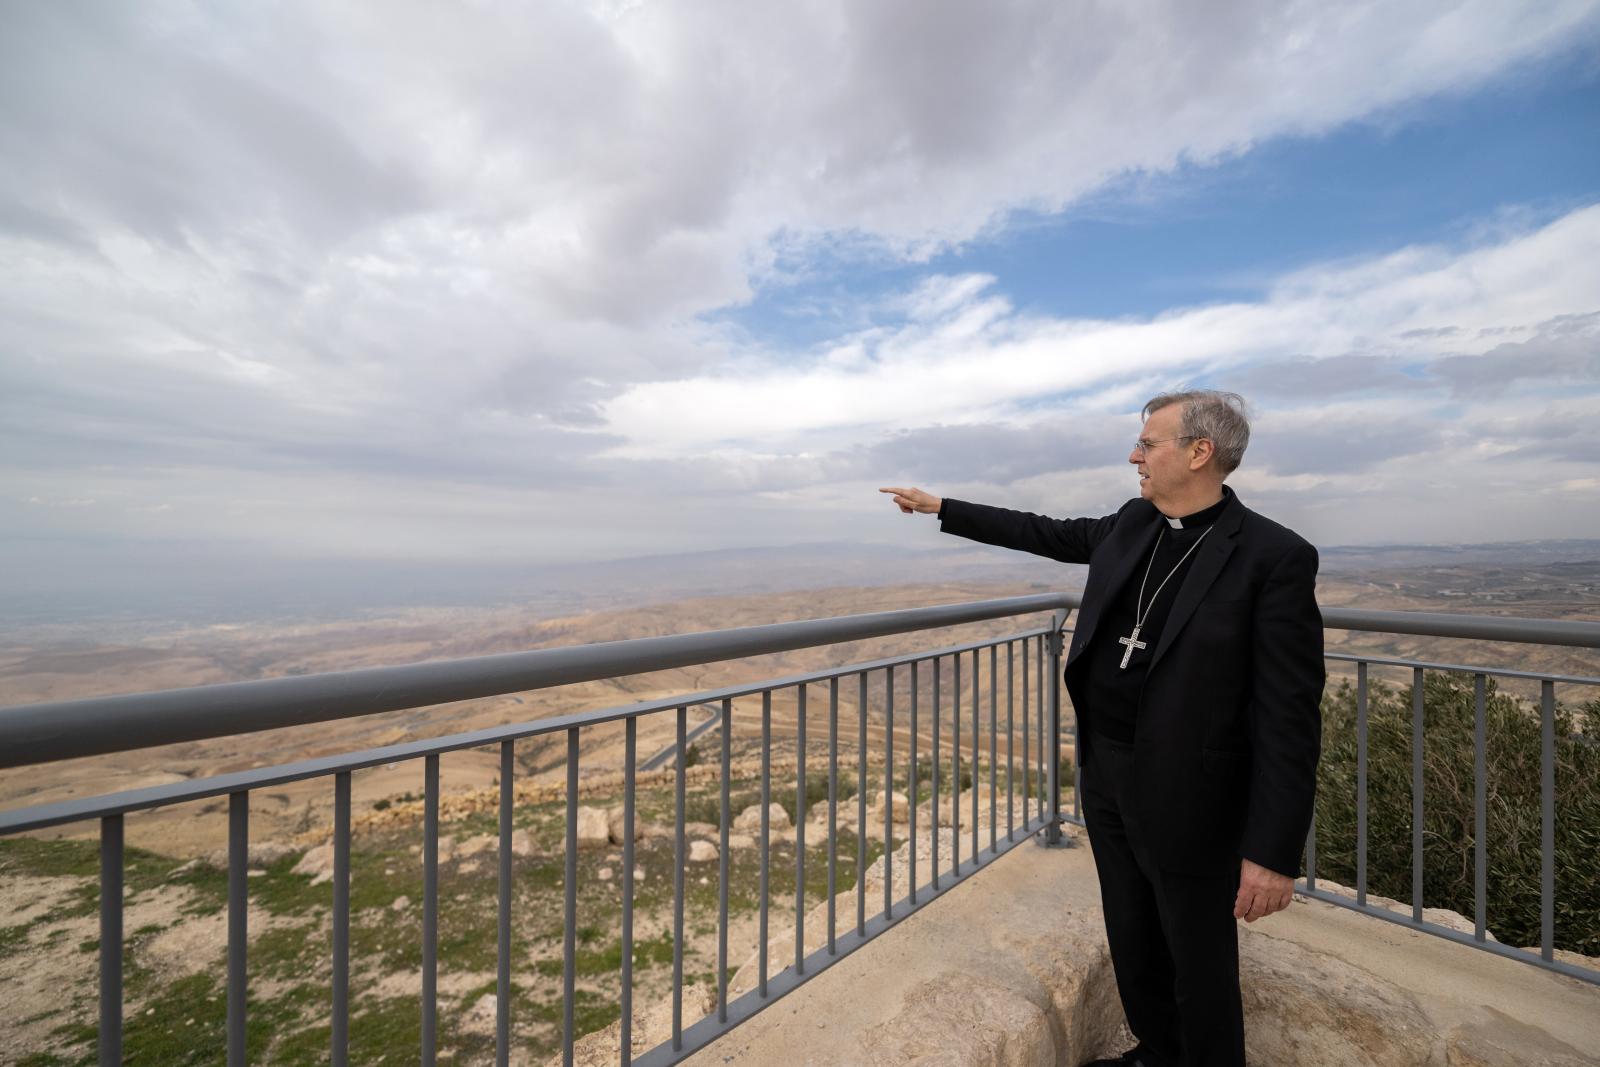 Praying for peace for the Holy Land - Diocese of Westminster